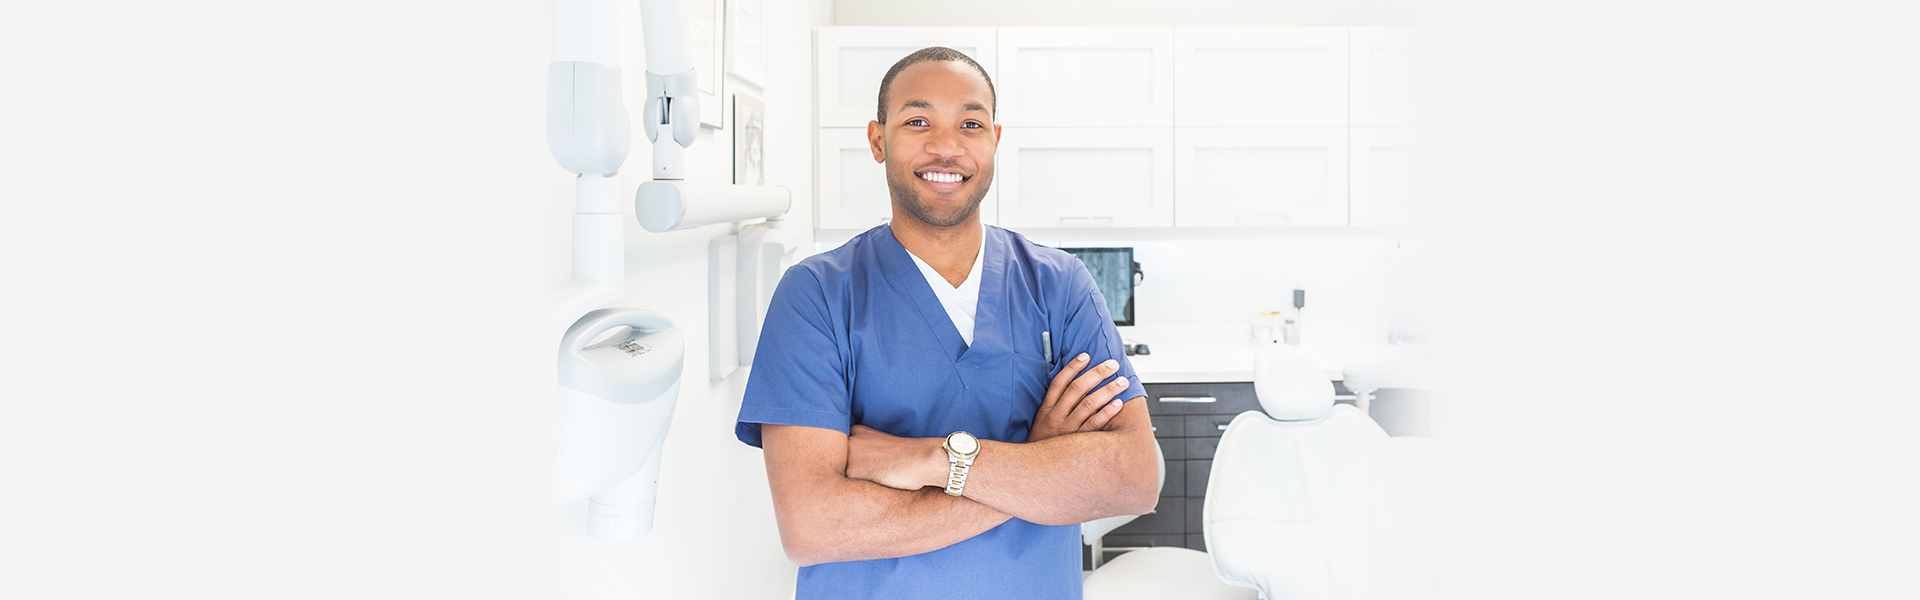 Dental Oral Surgery Near You in Poway, CA